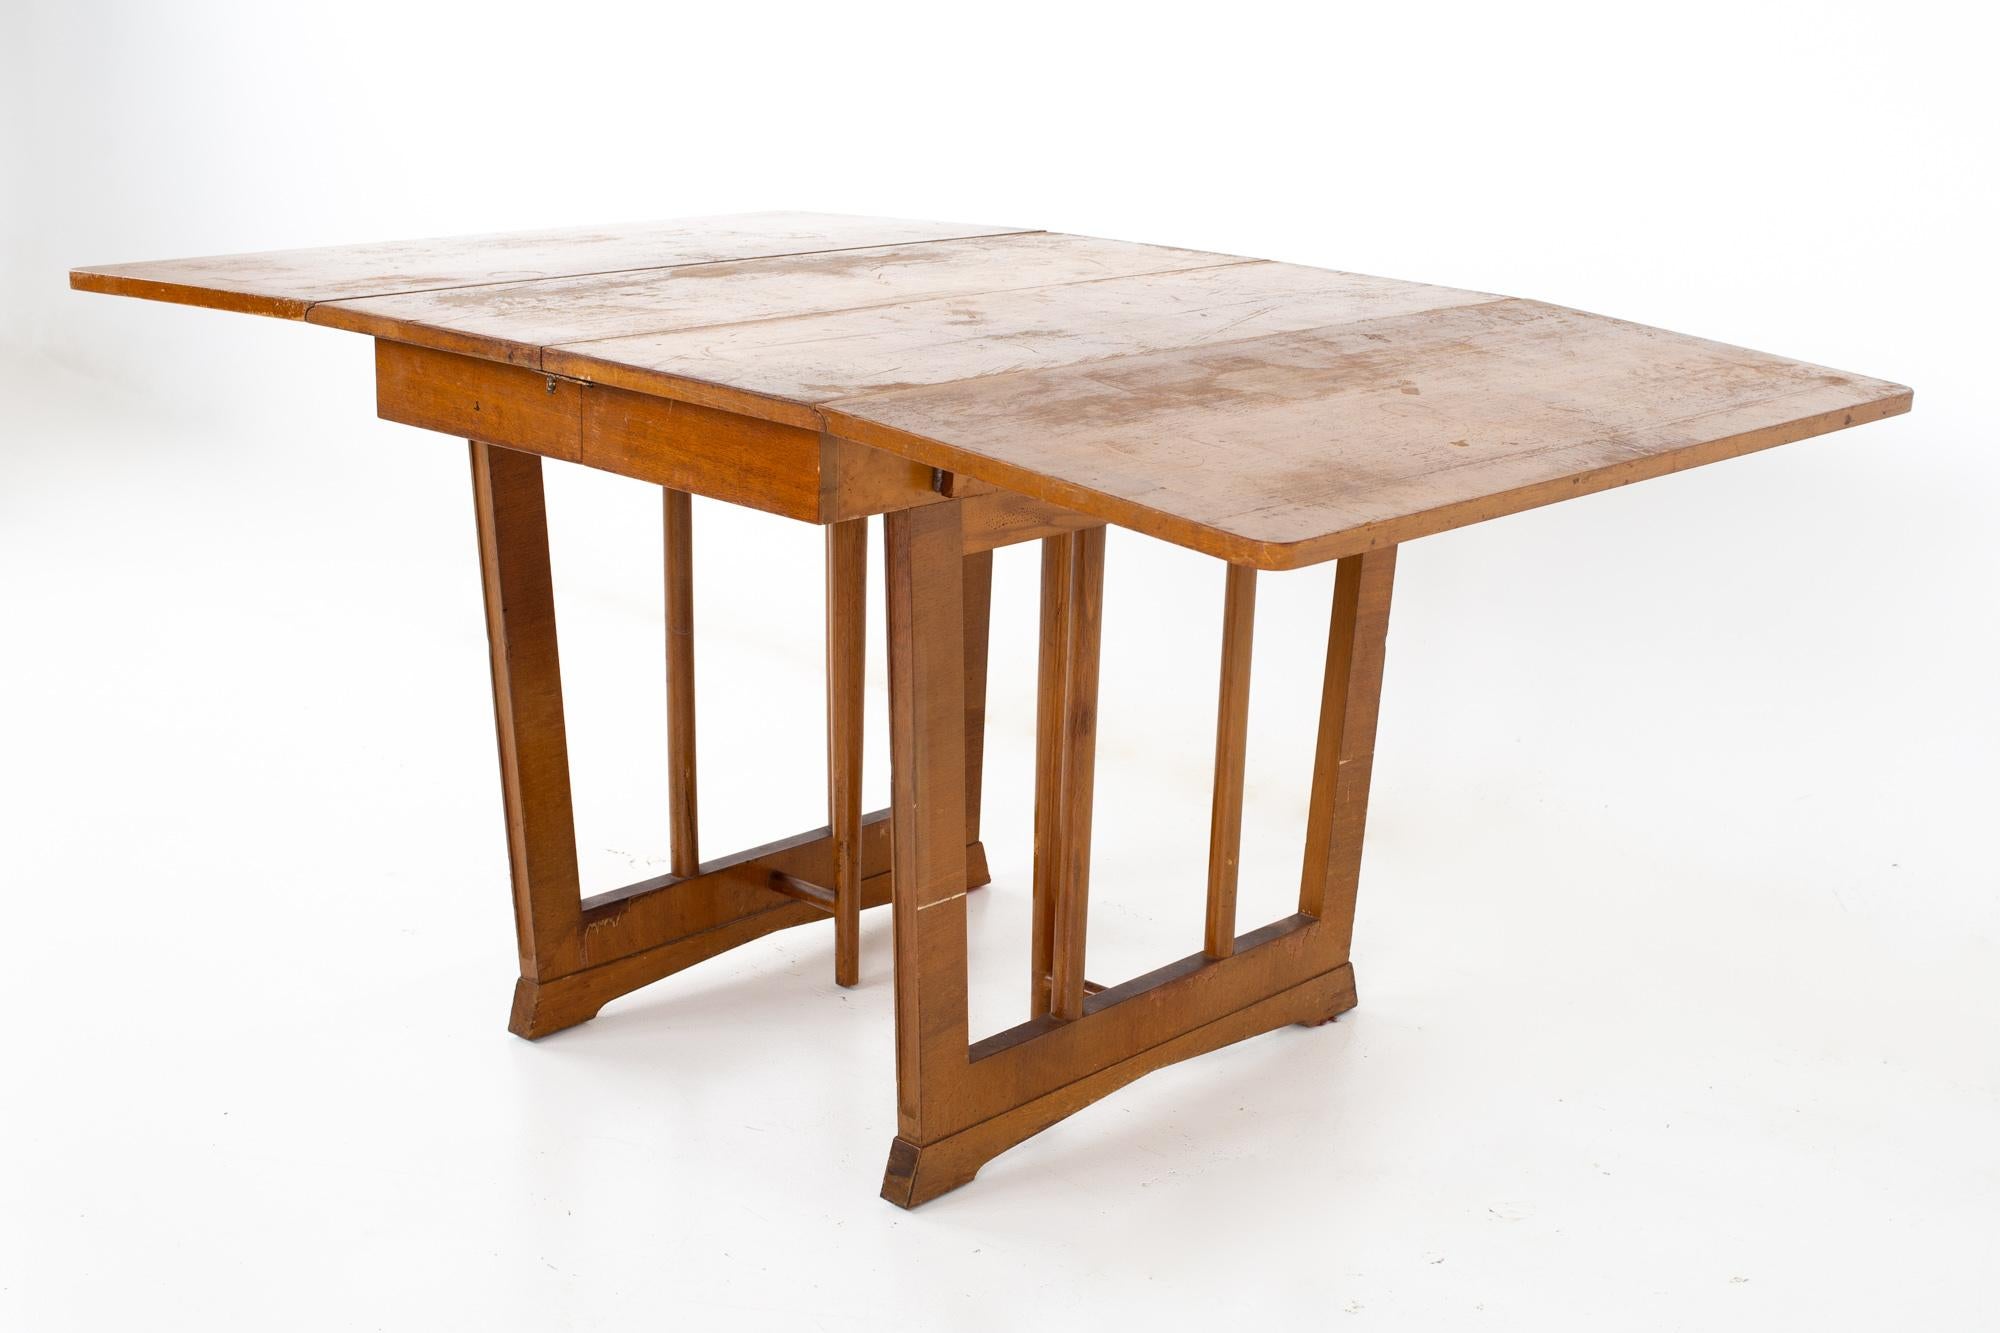 Eliel Saarinen for Rway mid century drop leaf table
Table measures: 62.5 wide x 40 deep x 30.25 inches high; the leaf is 12 inches in width, making a maximum table width of 74.5

All pieces of furniture can be had in what we call restored vintage